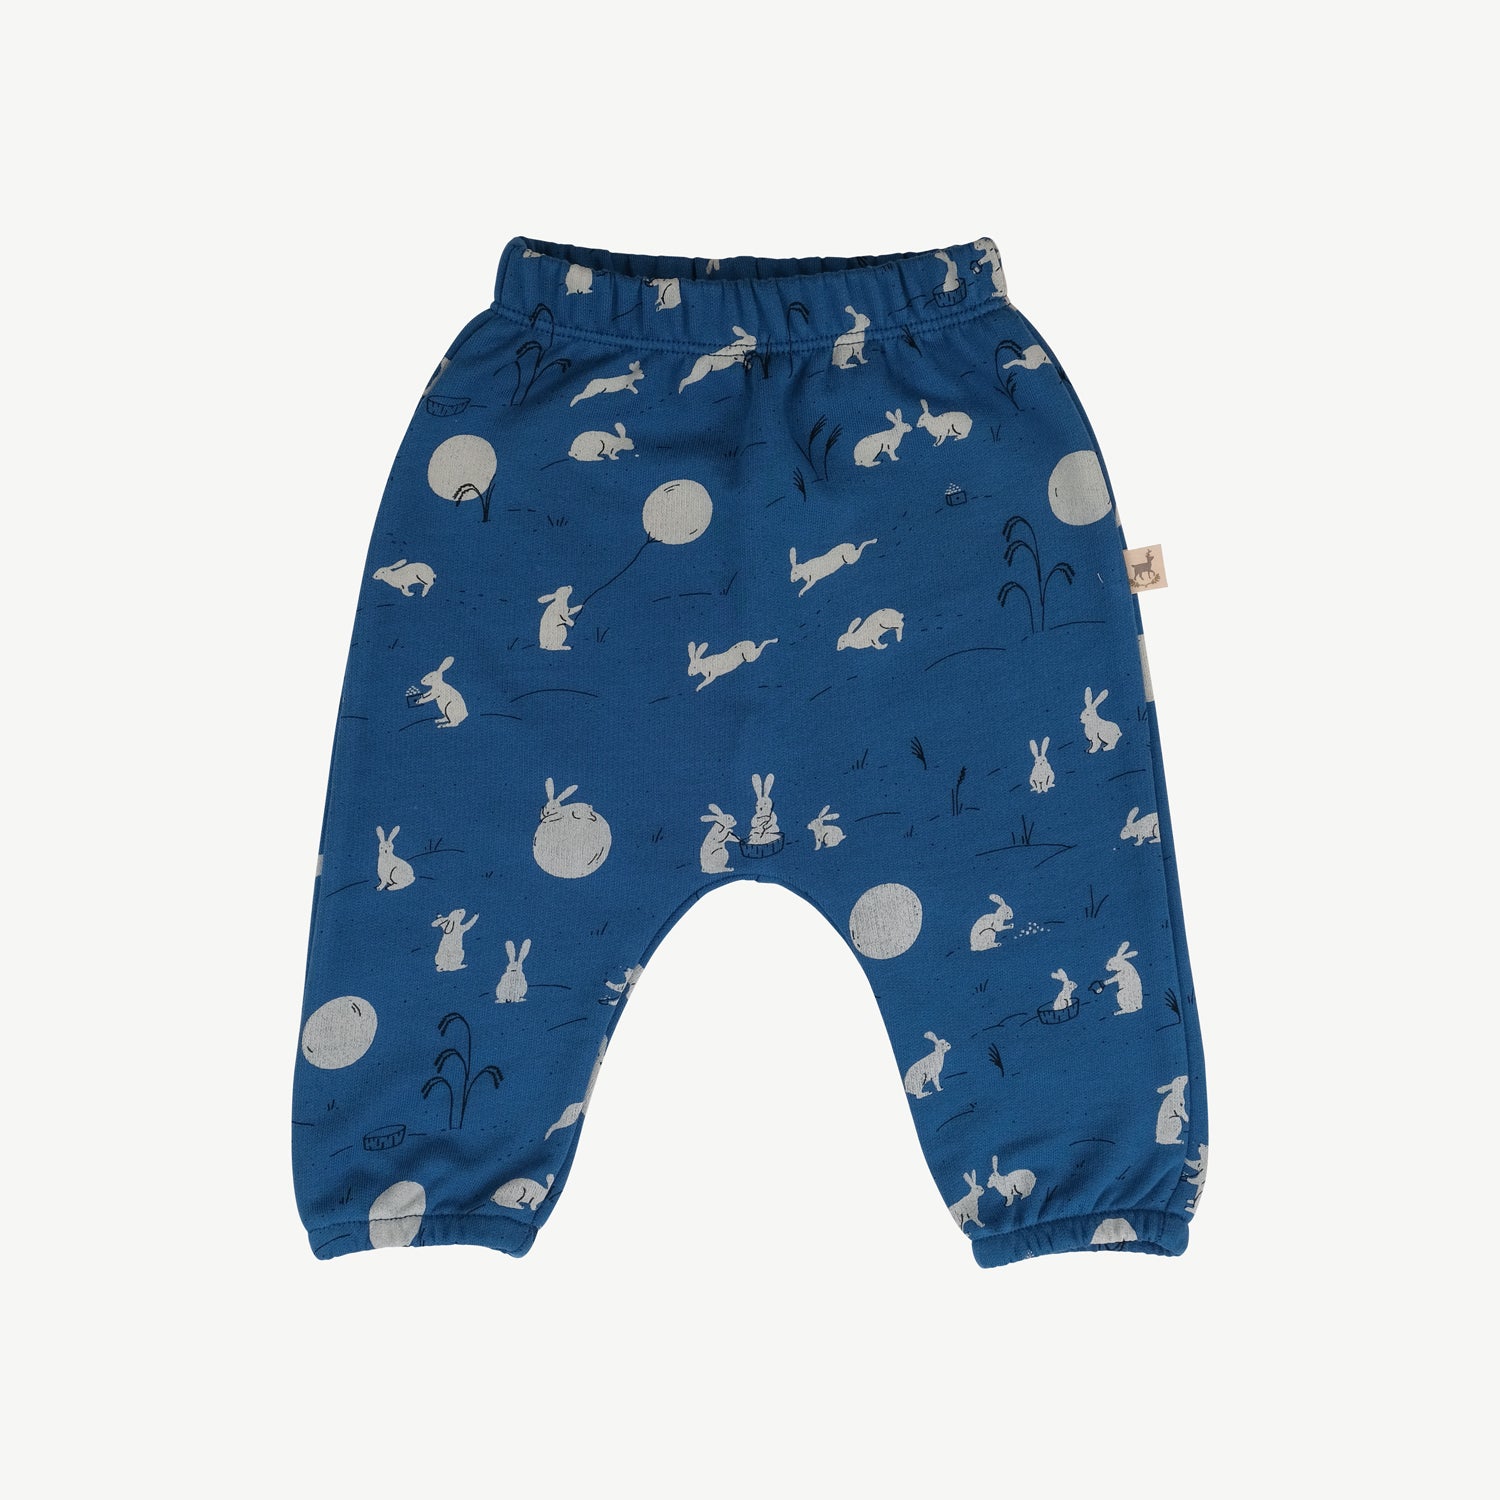 'once upon a moon' dark blue sweatshirt + jogger baby outfit